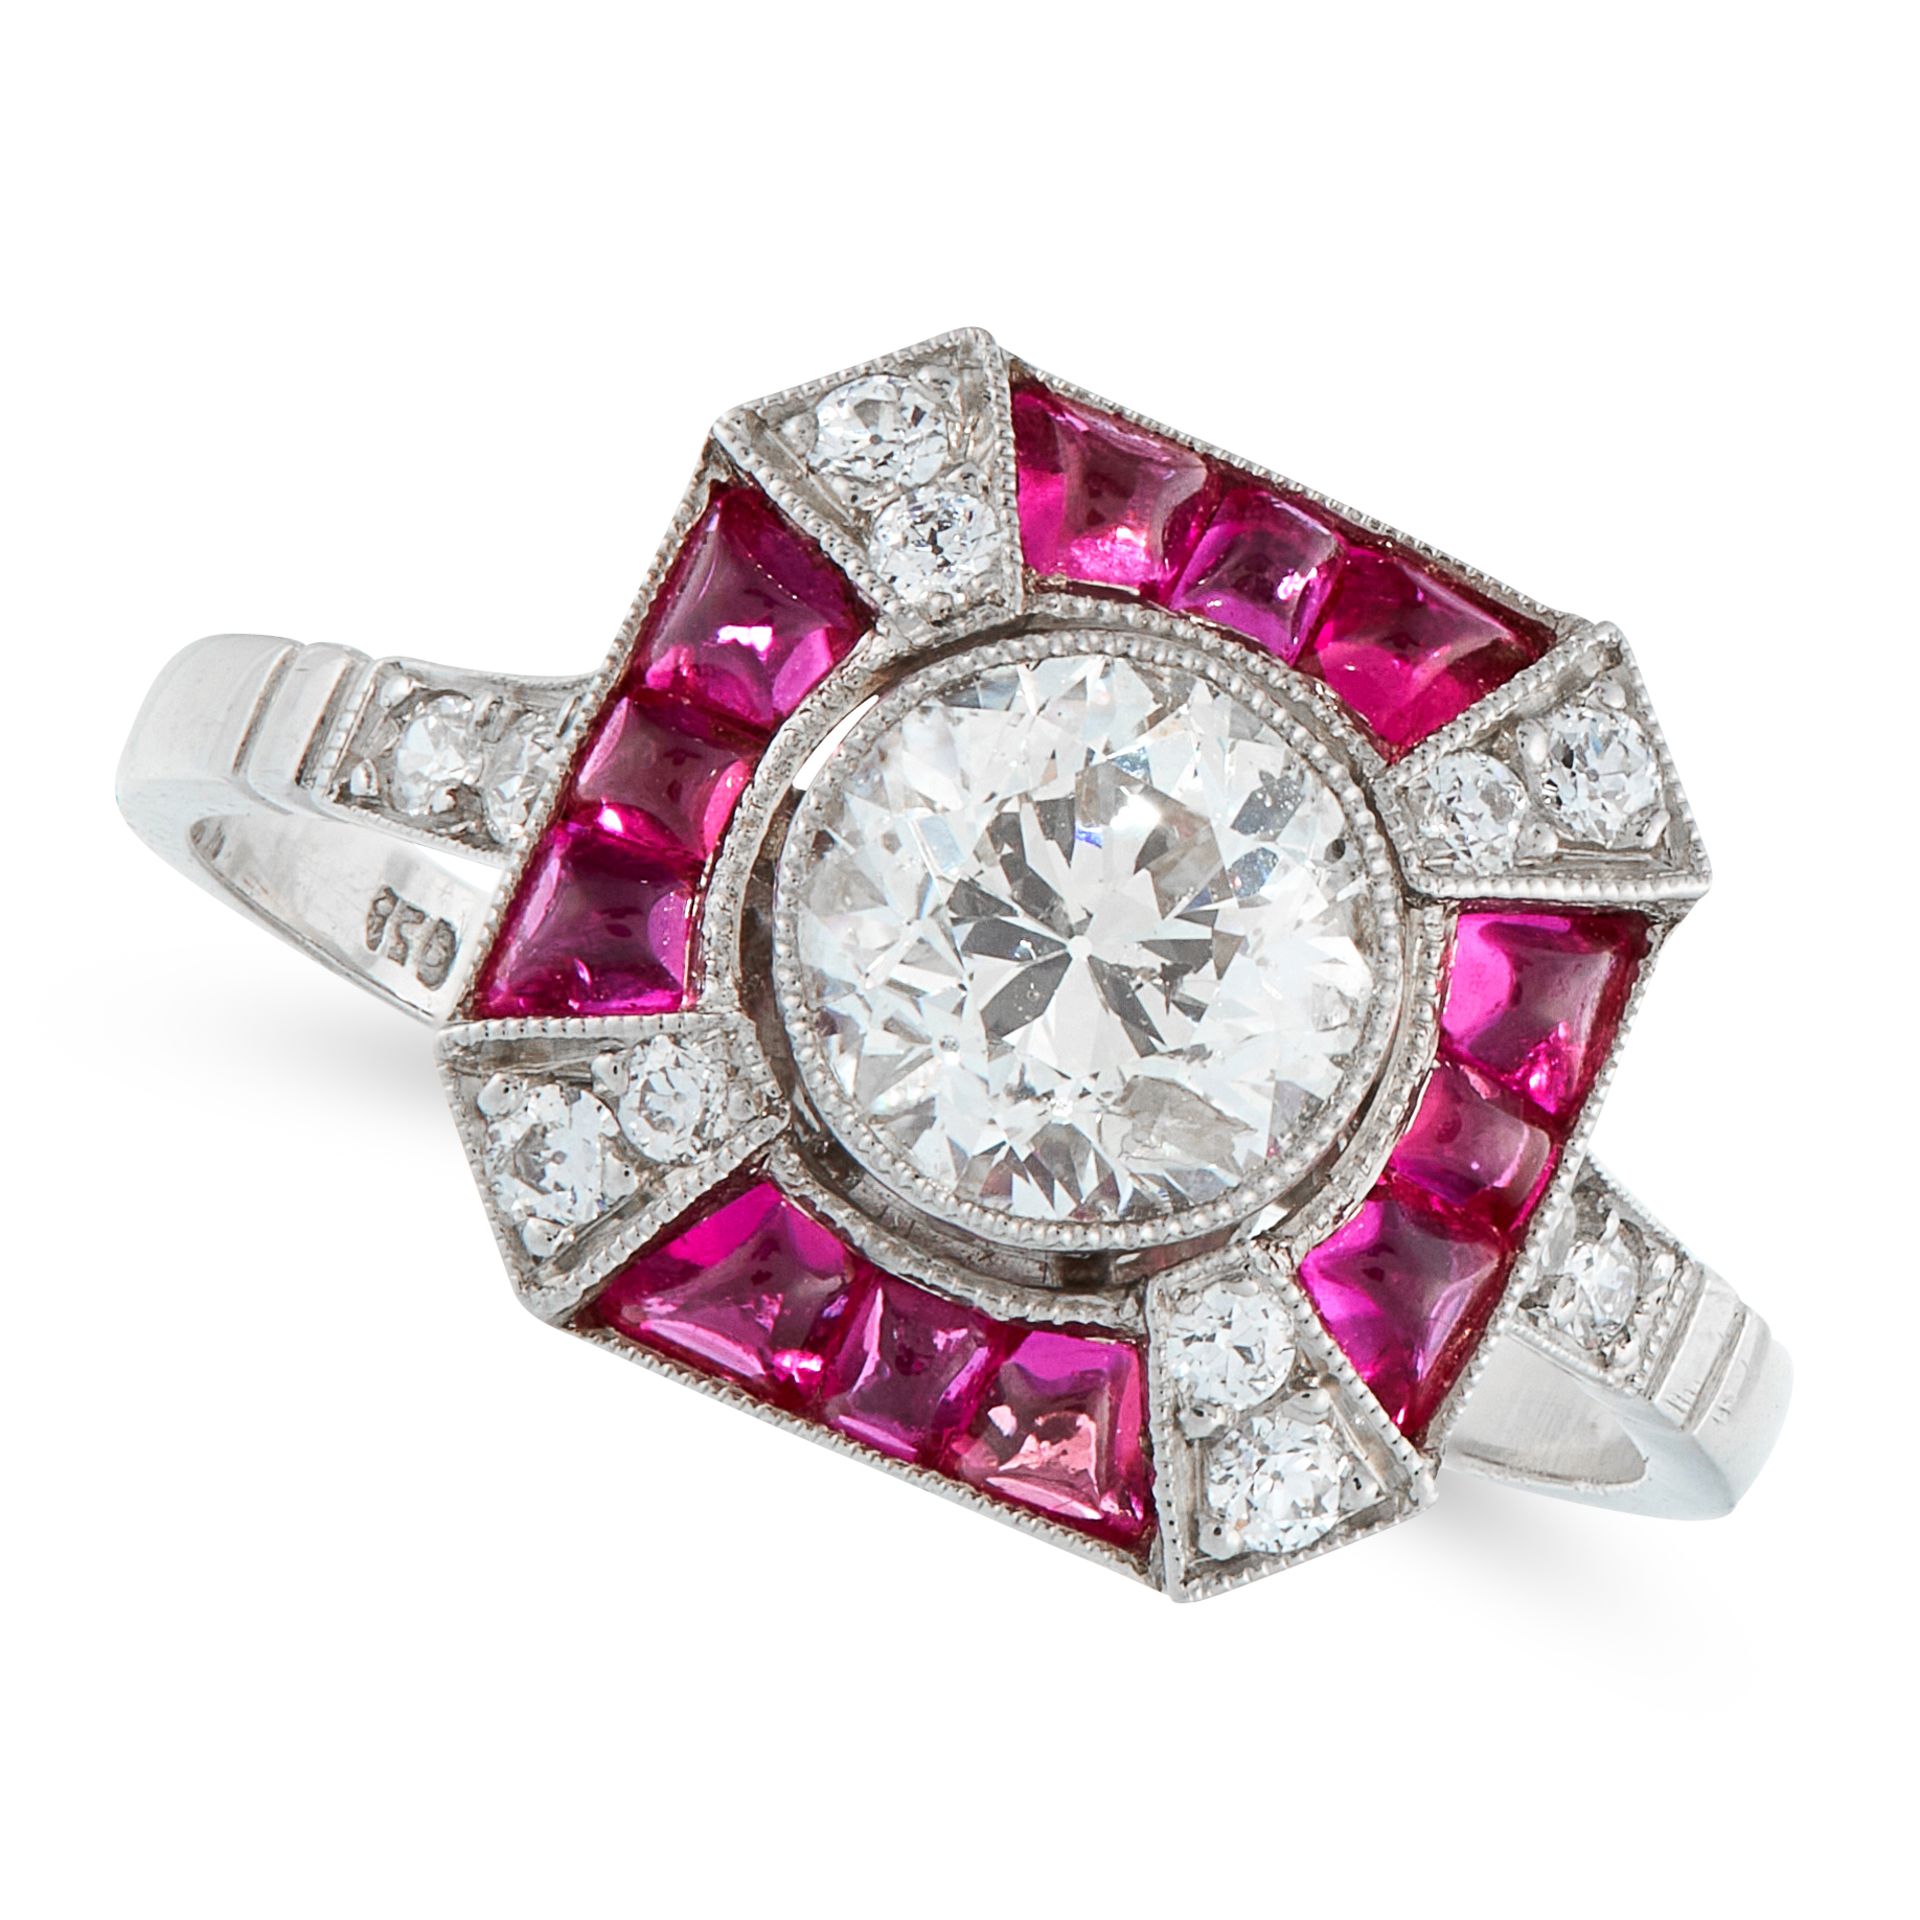 A RUBY AND DIAMOND DRESS RING in platinum, in Art Deco design, set with a round cut diamond of